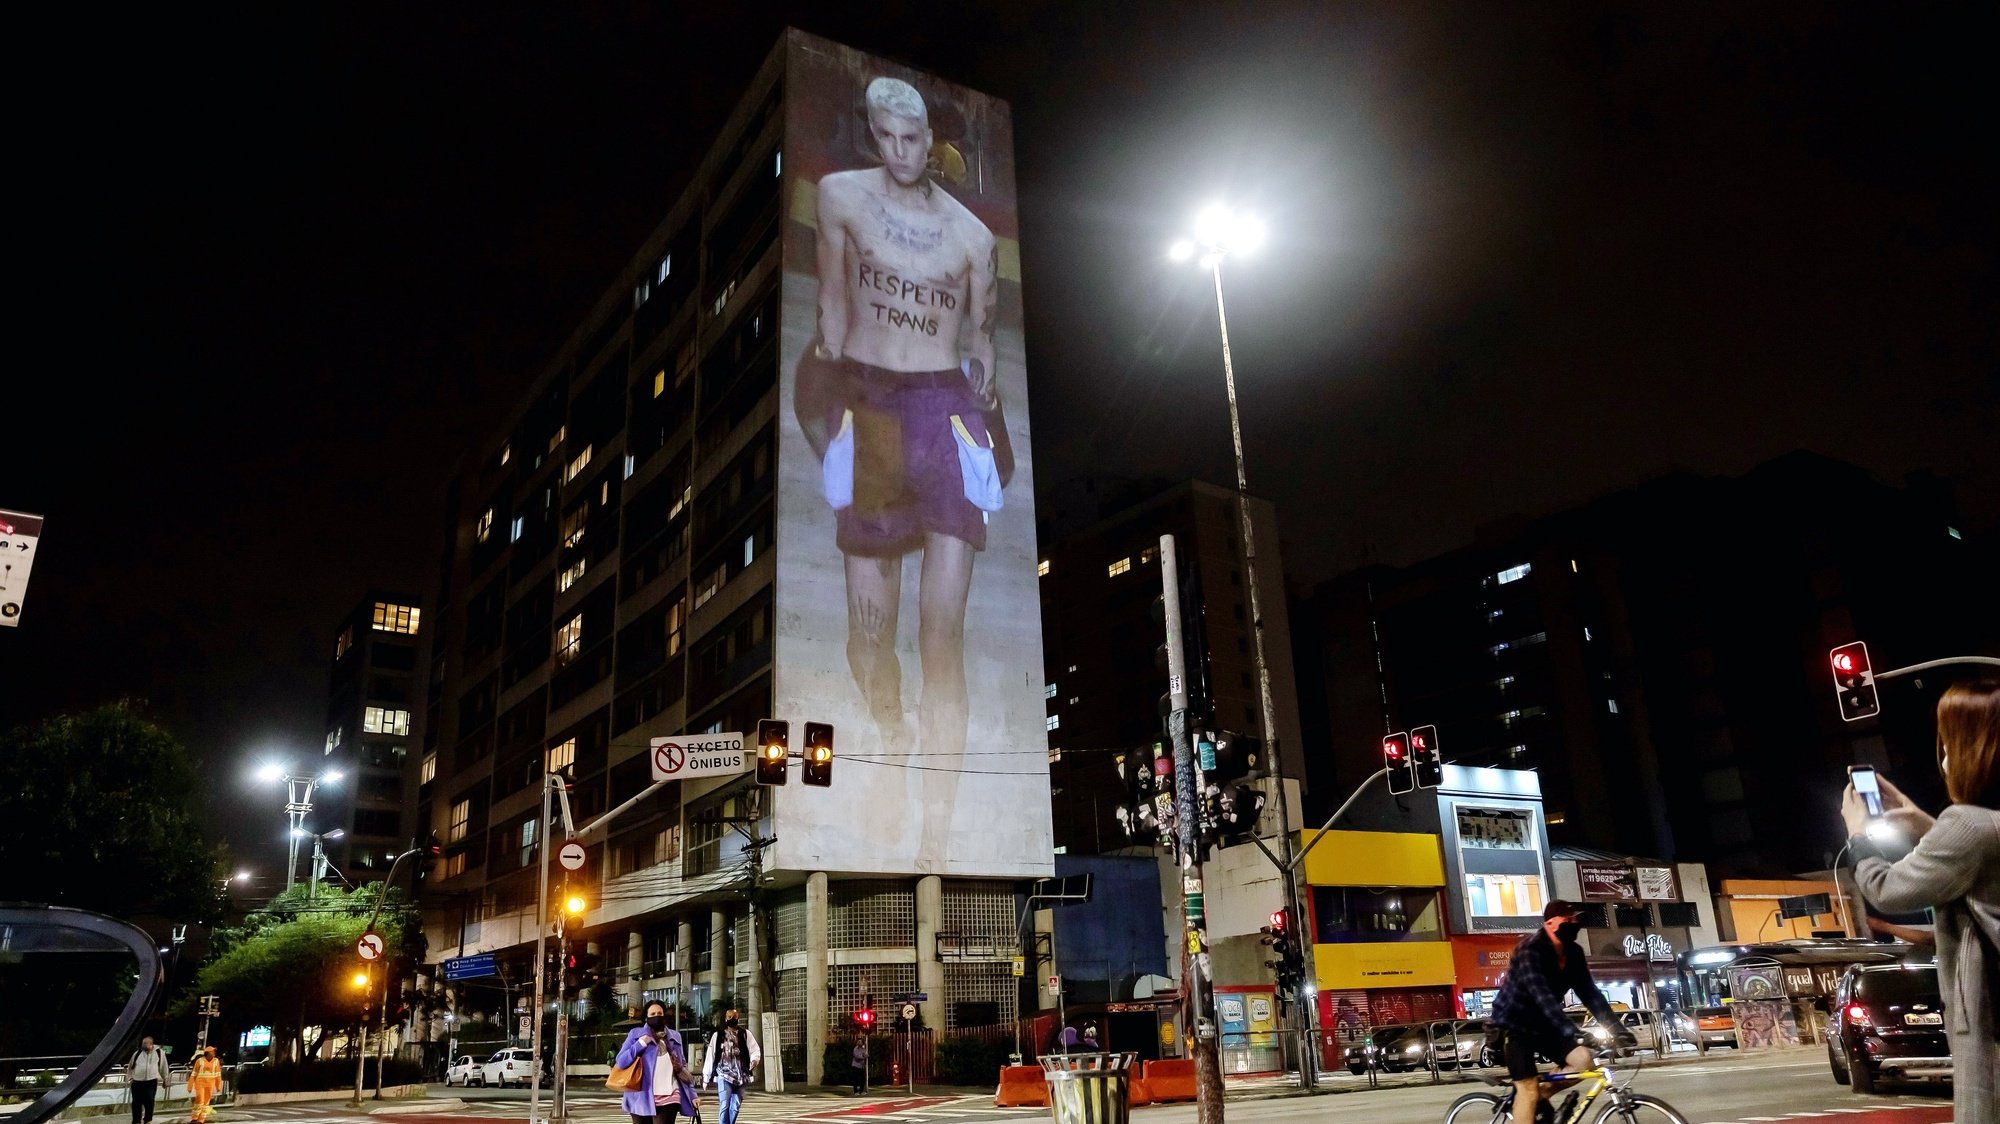 epa08799619 A shows is projected of the Sao Paulo Fashion Week onto the facade of a building on Paulista Avenue in Sao Paulo, Brazil, 04 November 2020. Sao Paulo Fashion Week is in its 25th year.  EPA/Sebastiao Moreira